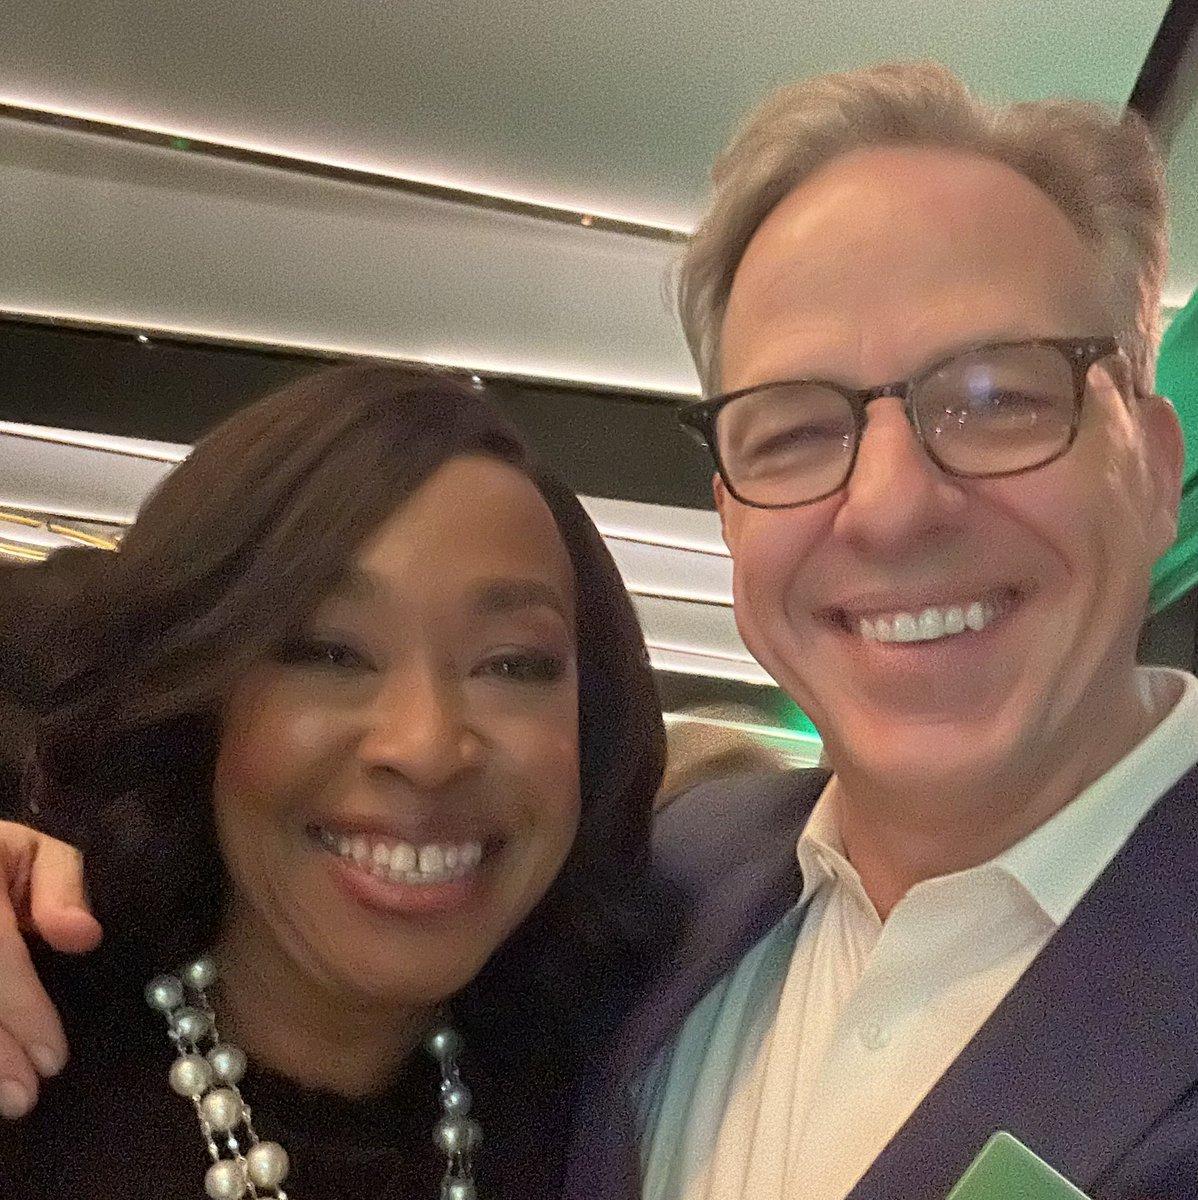 What an honor to introduce the amazing Queen of Storytelling @shondarhimes as she was honored by @Dartmouth as Entrepreneur of the Year! #GoBigGreen